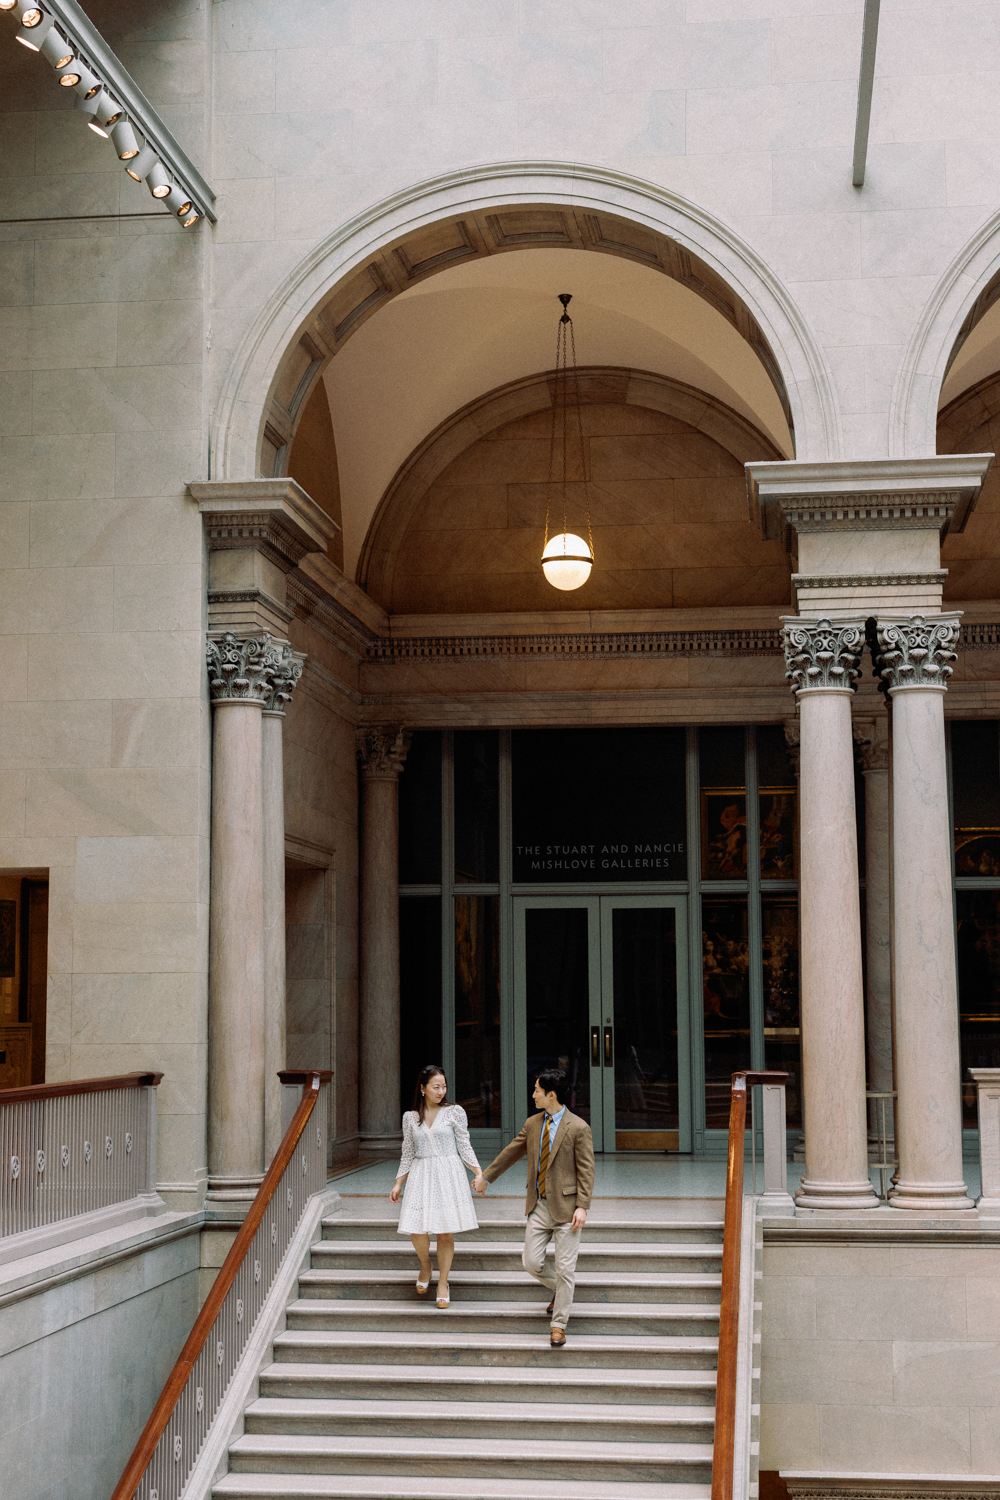 Engagement photo on grand staircase at the Art Institute of Chicago.